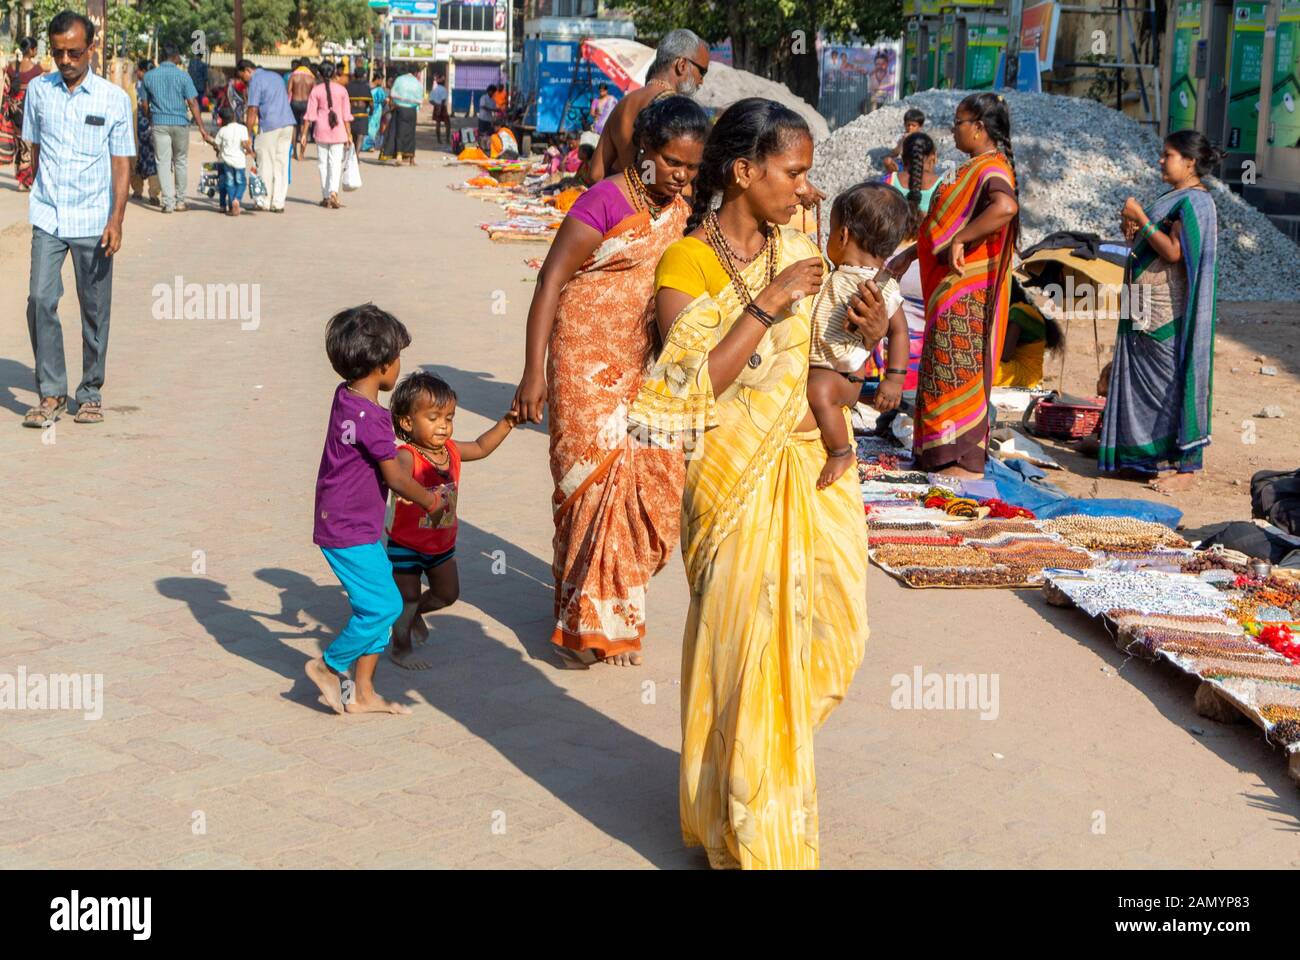 A local female holding a baby, Madurai, South India Stock Photo